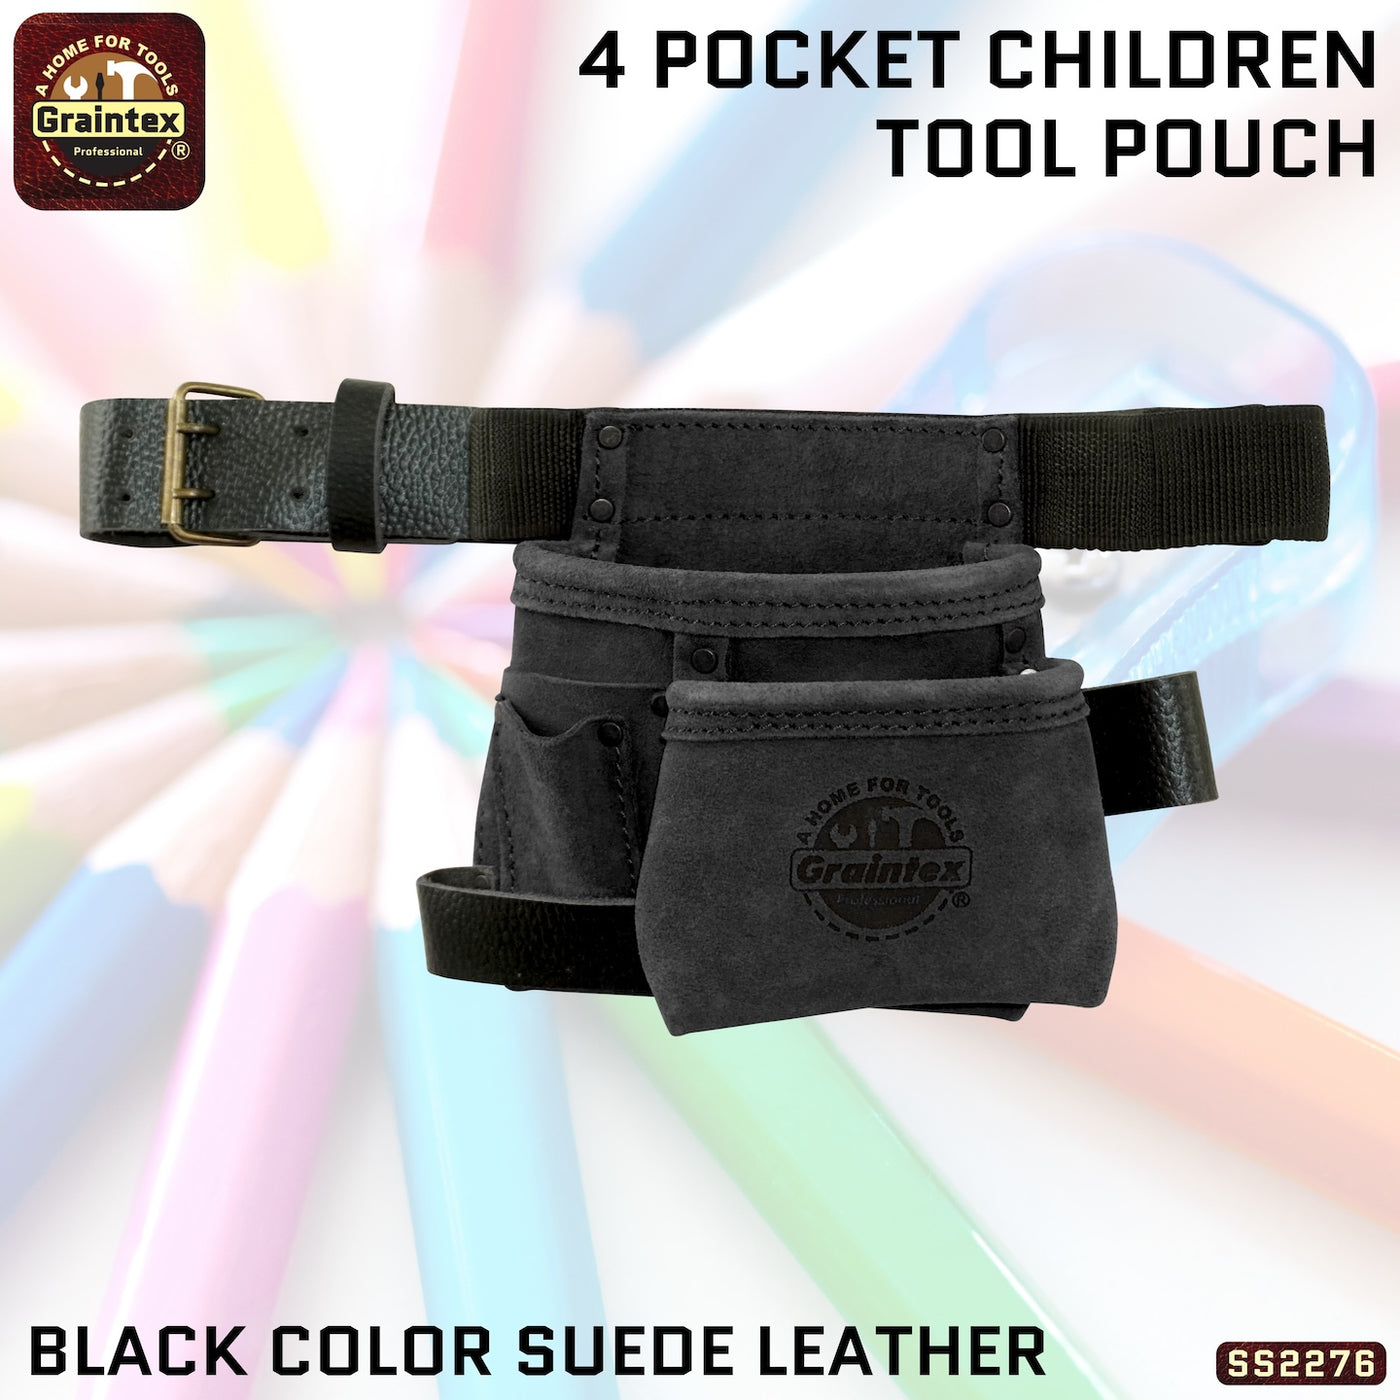 SS2276 :: 4 Pocket Children Tool Pouch Black Color Suede Leather